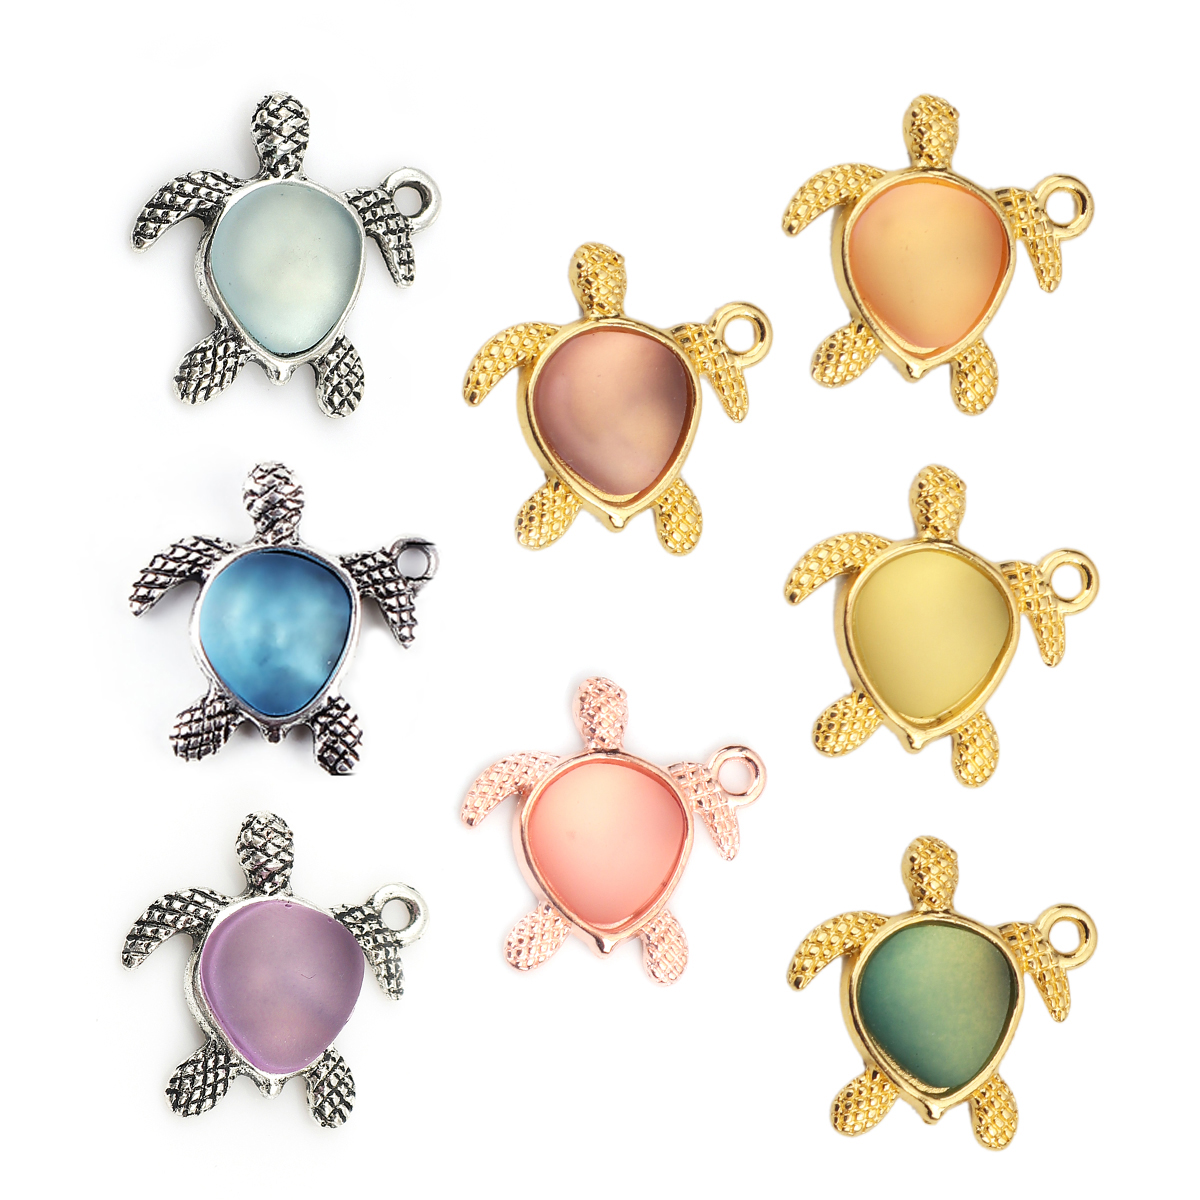 Picture of Zinc Based Alloy & Resin Ocean Jewelry Charms Sea Turtle Animal Antique Silver Light Blue 20mm( 6/8") x 19mm( 6/8"), 5 PCs